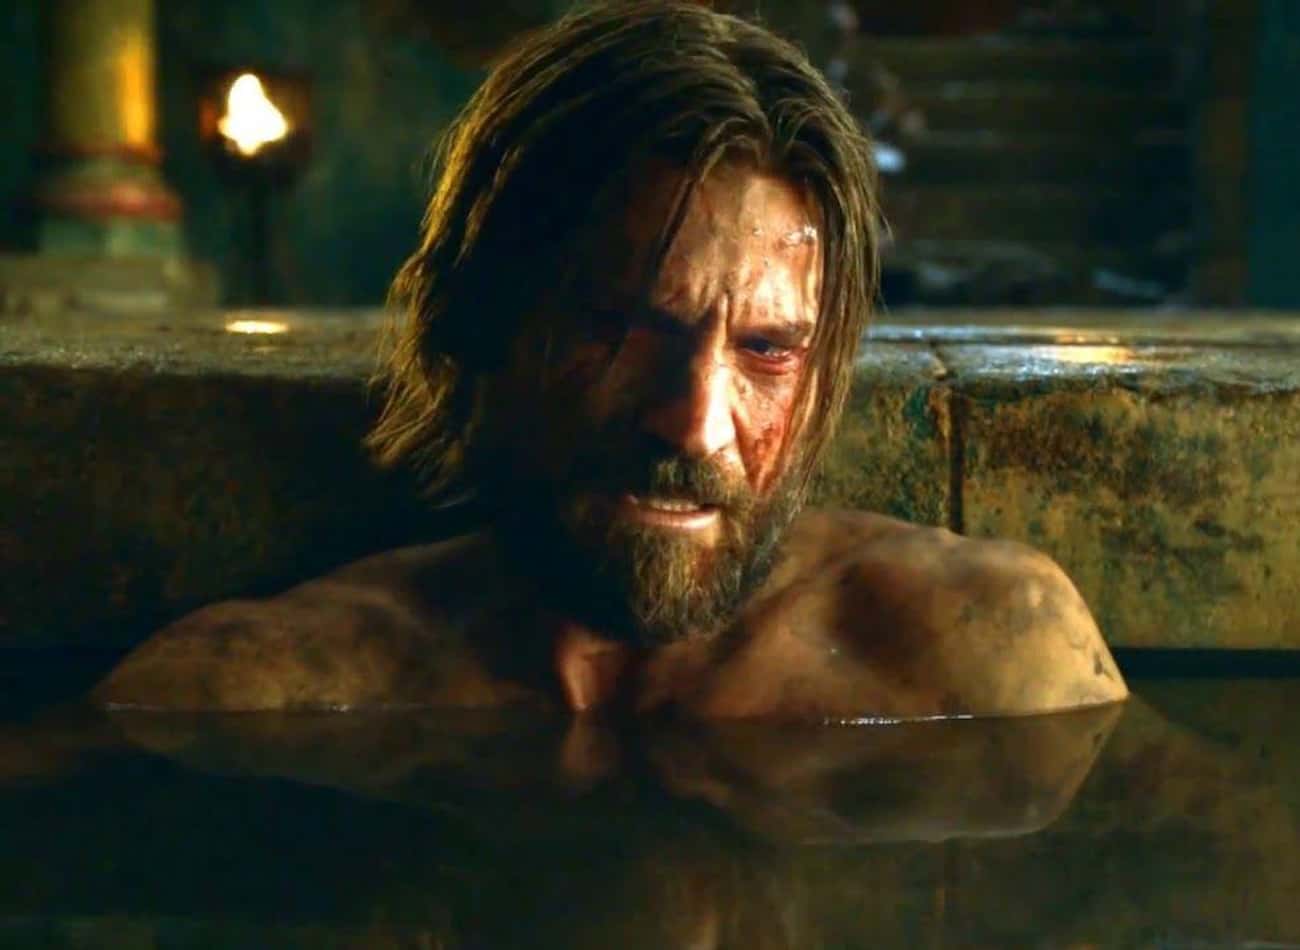 Jaime Shows Vulnerability When He Opens Up To Brienne In The Baths